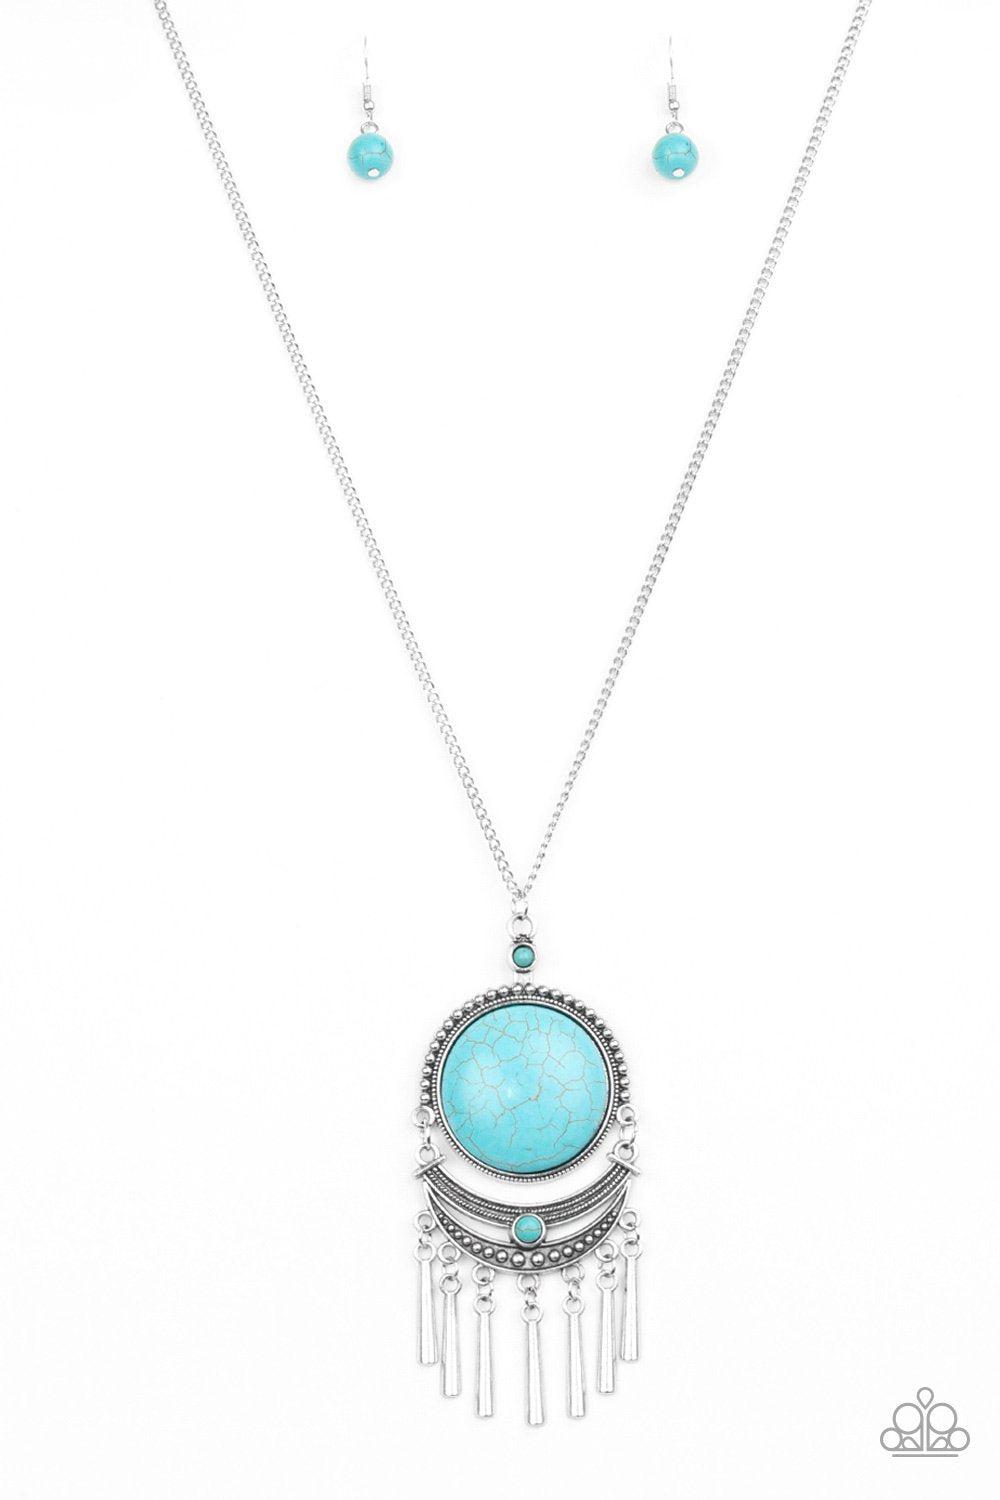 Rural Rustler Turquoise Blue Stone Necklace - Paparazzi Accessories- lightbox - CarasShop.com - $5 Jewelry by Cara Jewels